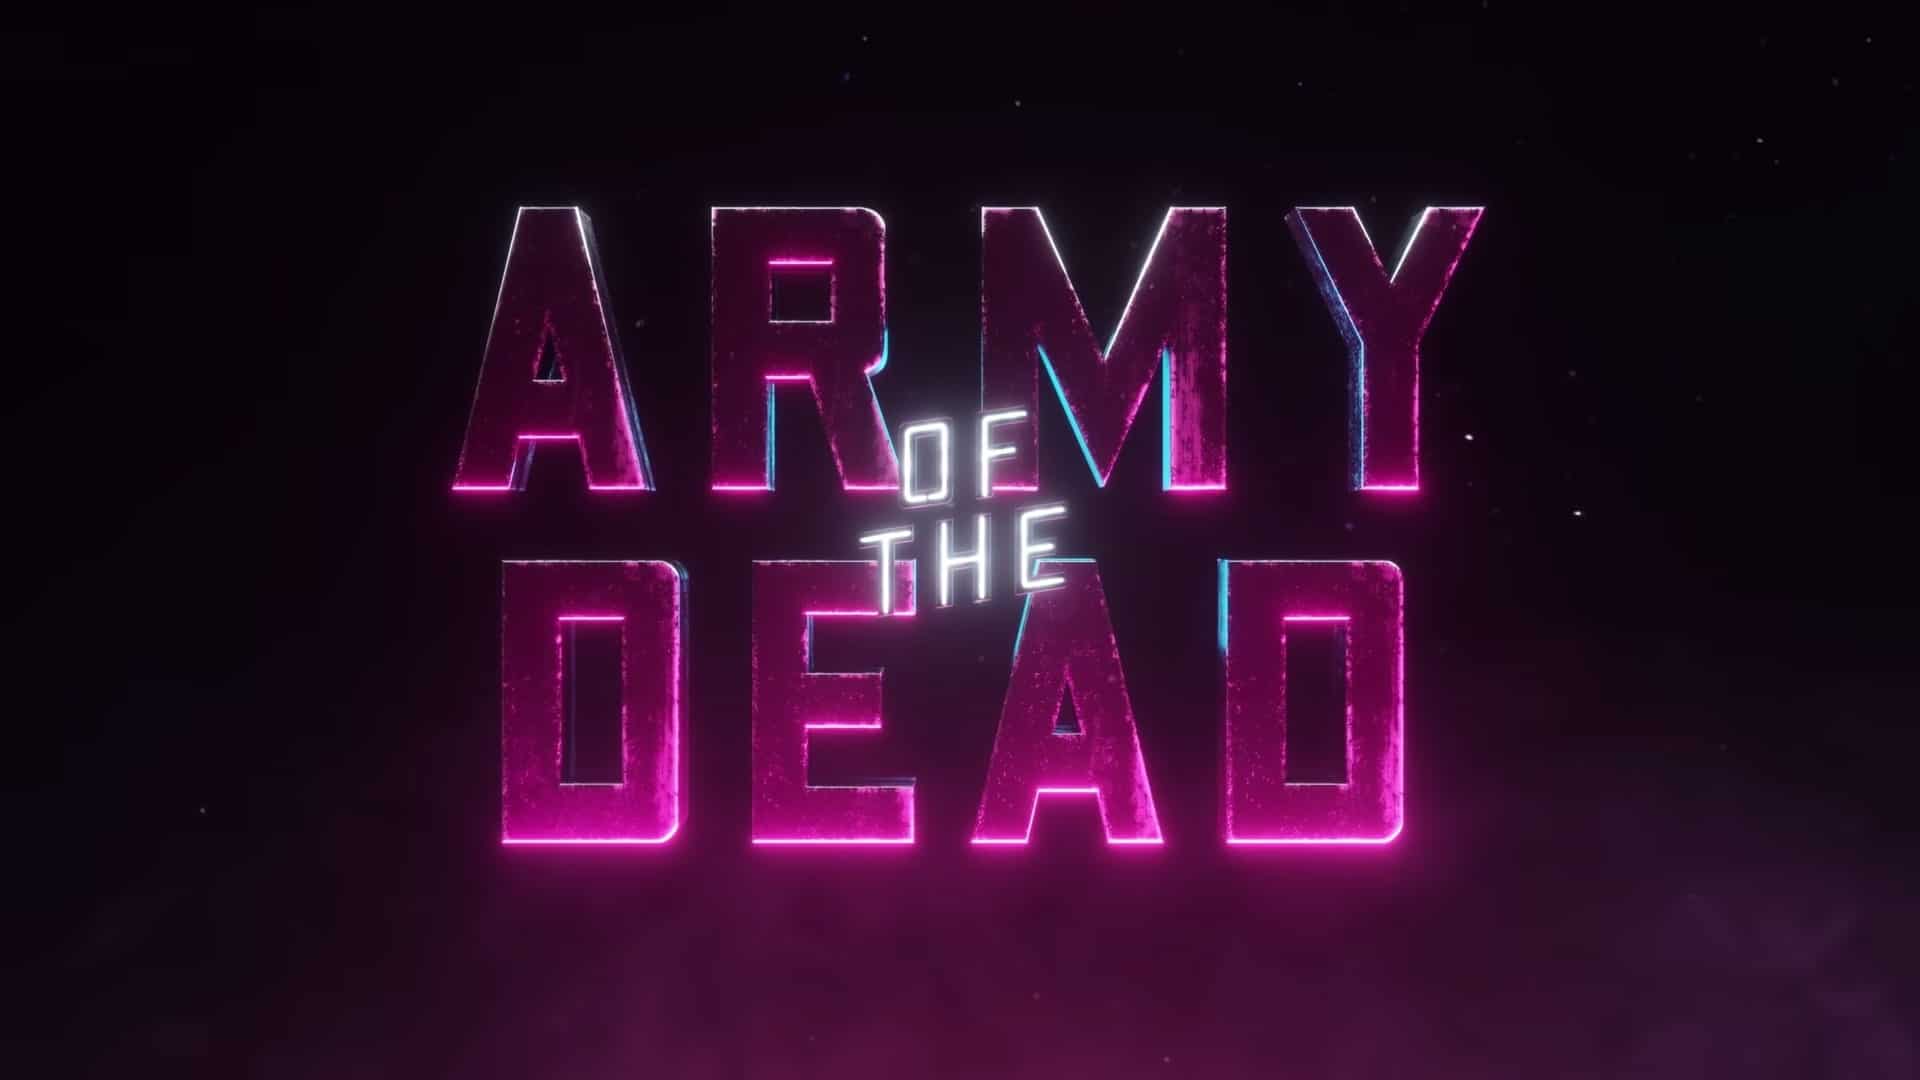 Netflix Army of the Dead Trailer, Netflix Action Film, Coming to Netflix in April 2021